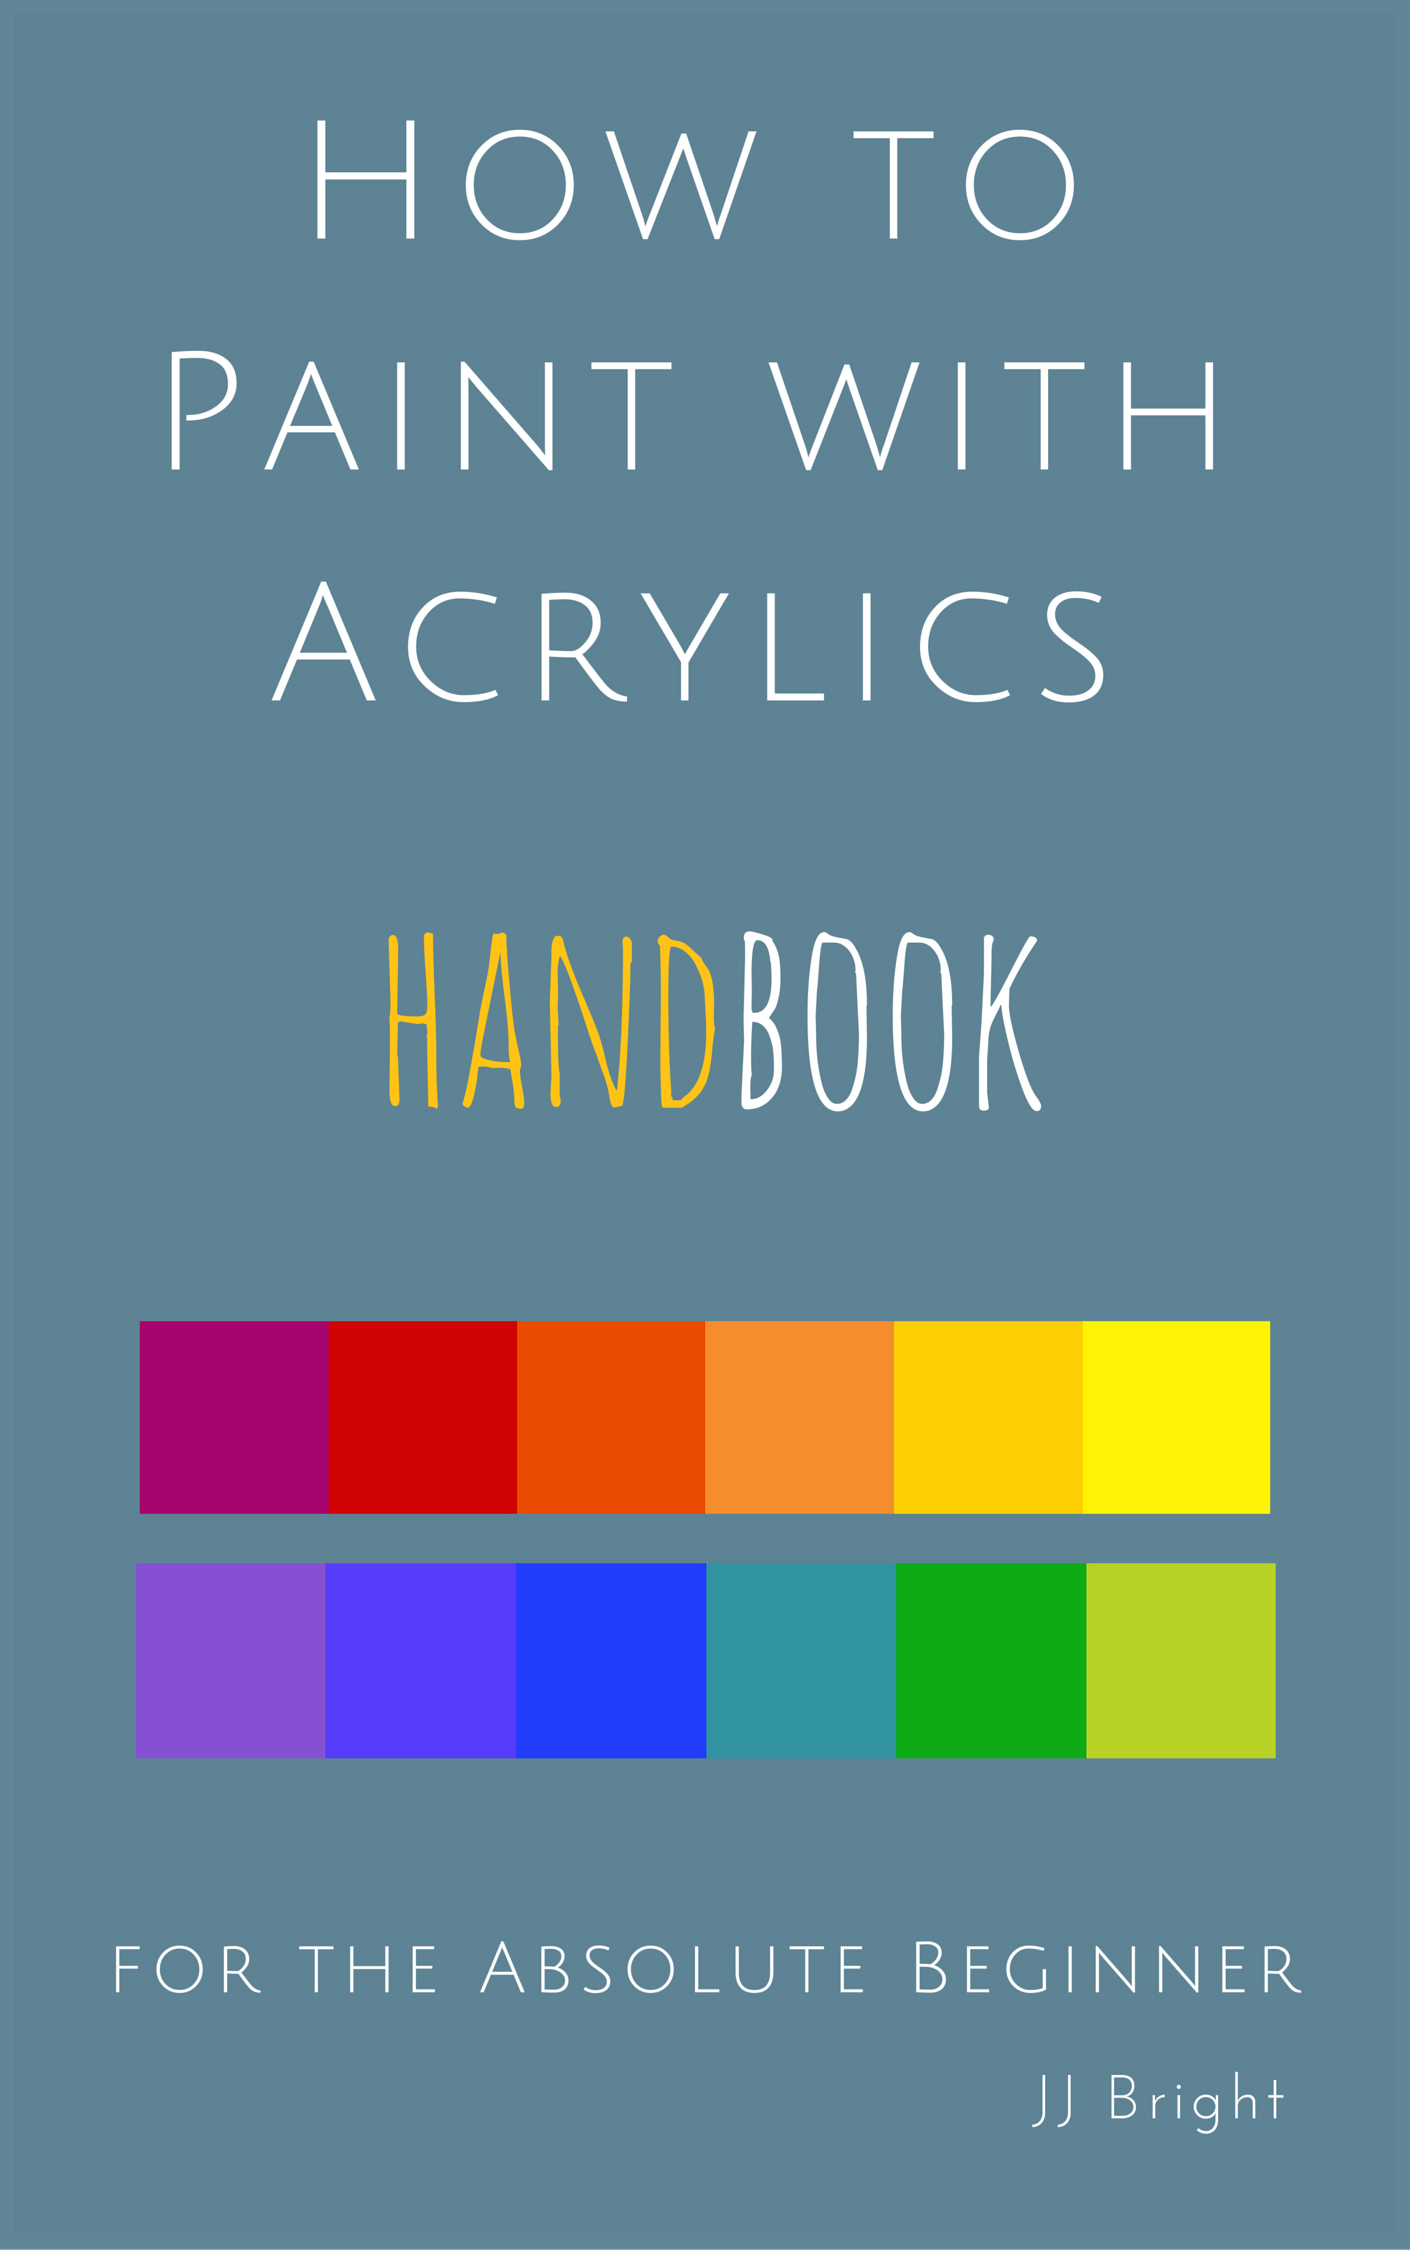 how to paint with acrylics for the absolute beginner handbook J Bright